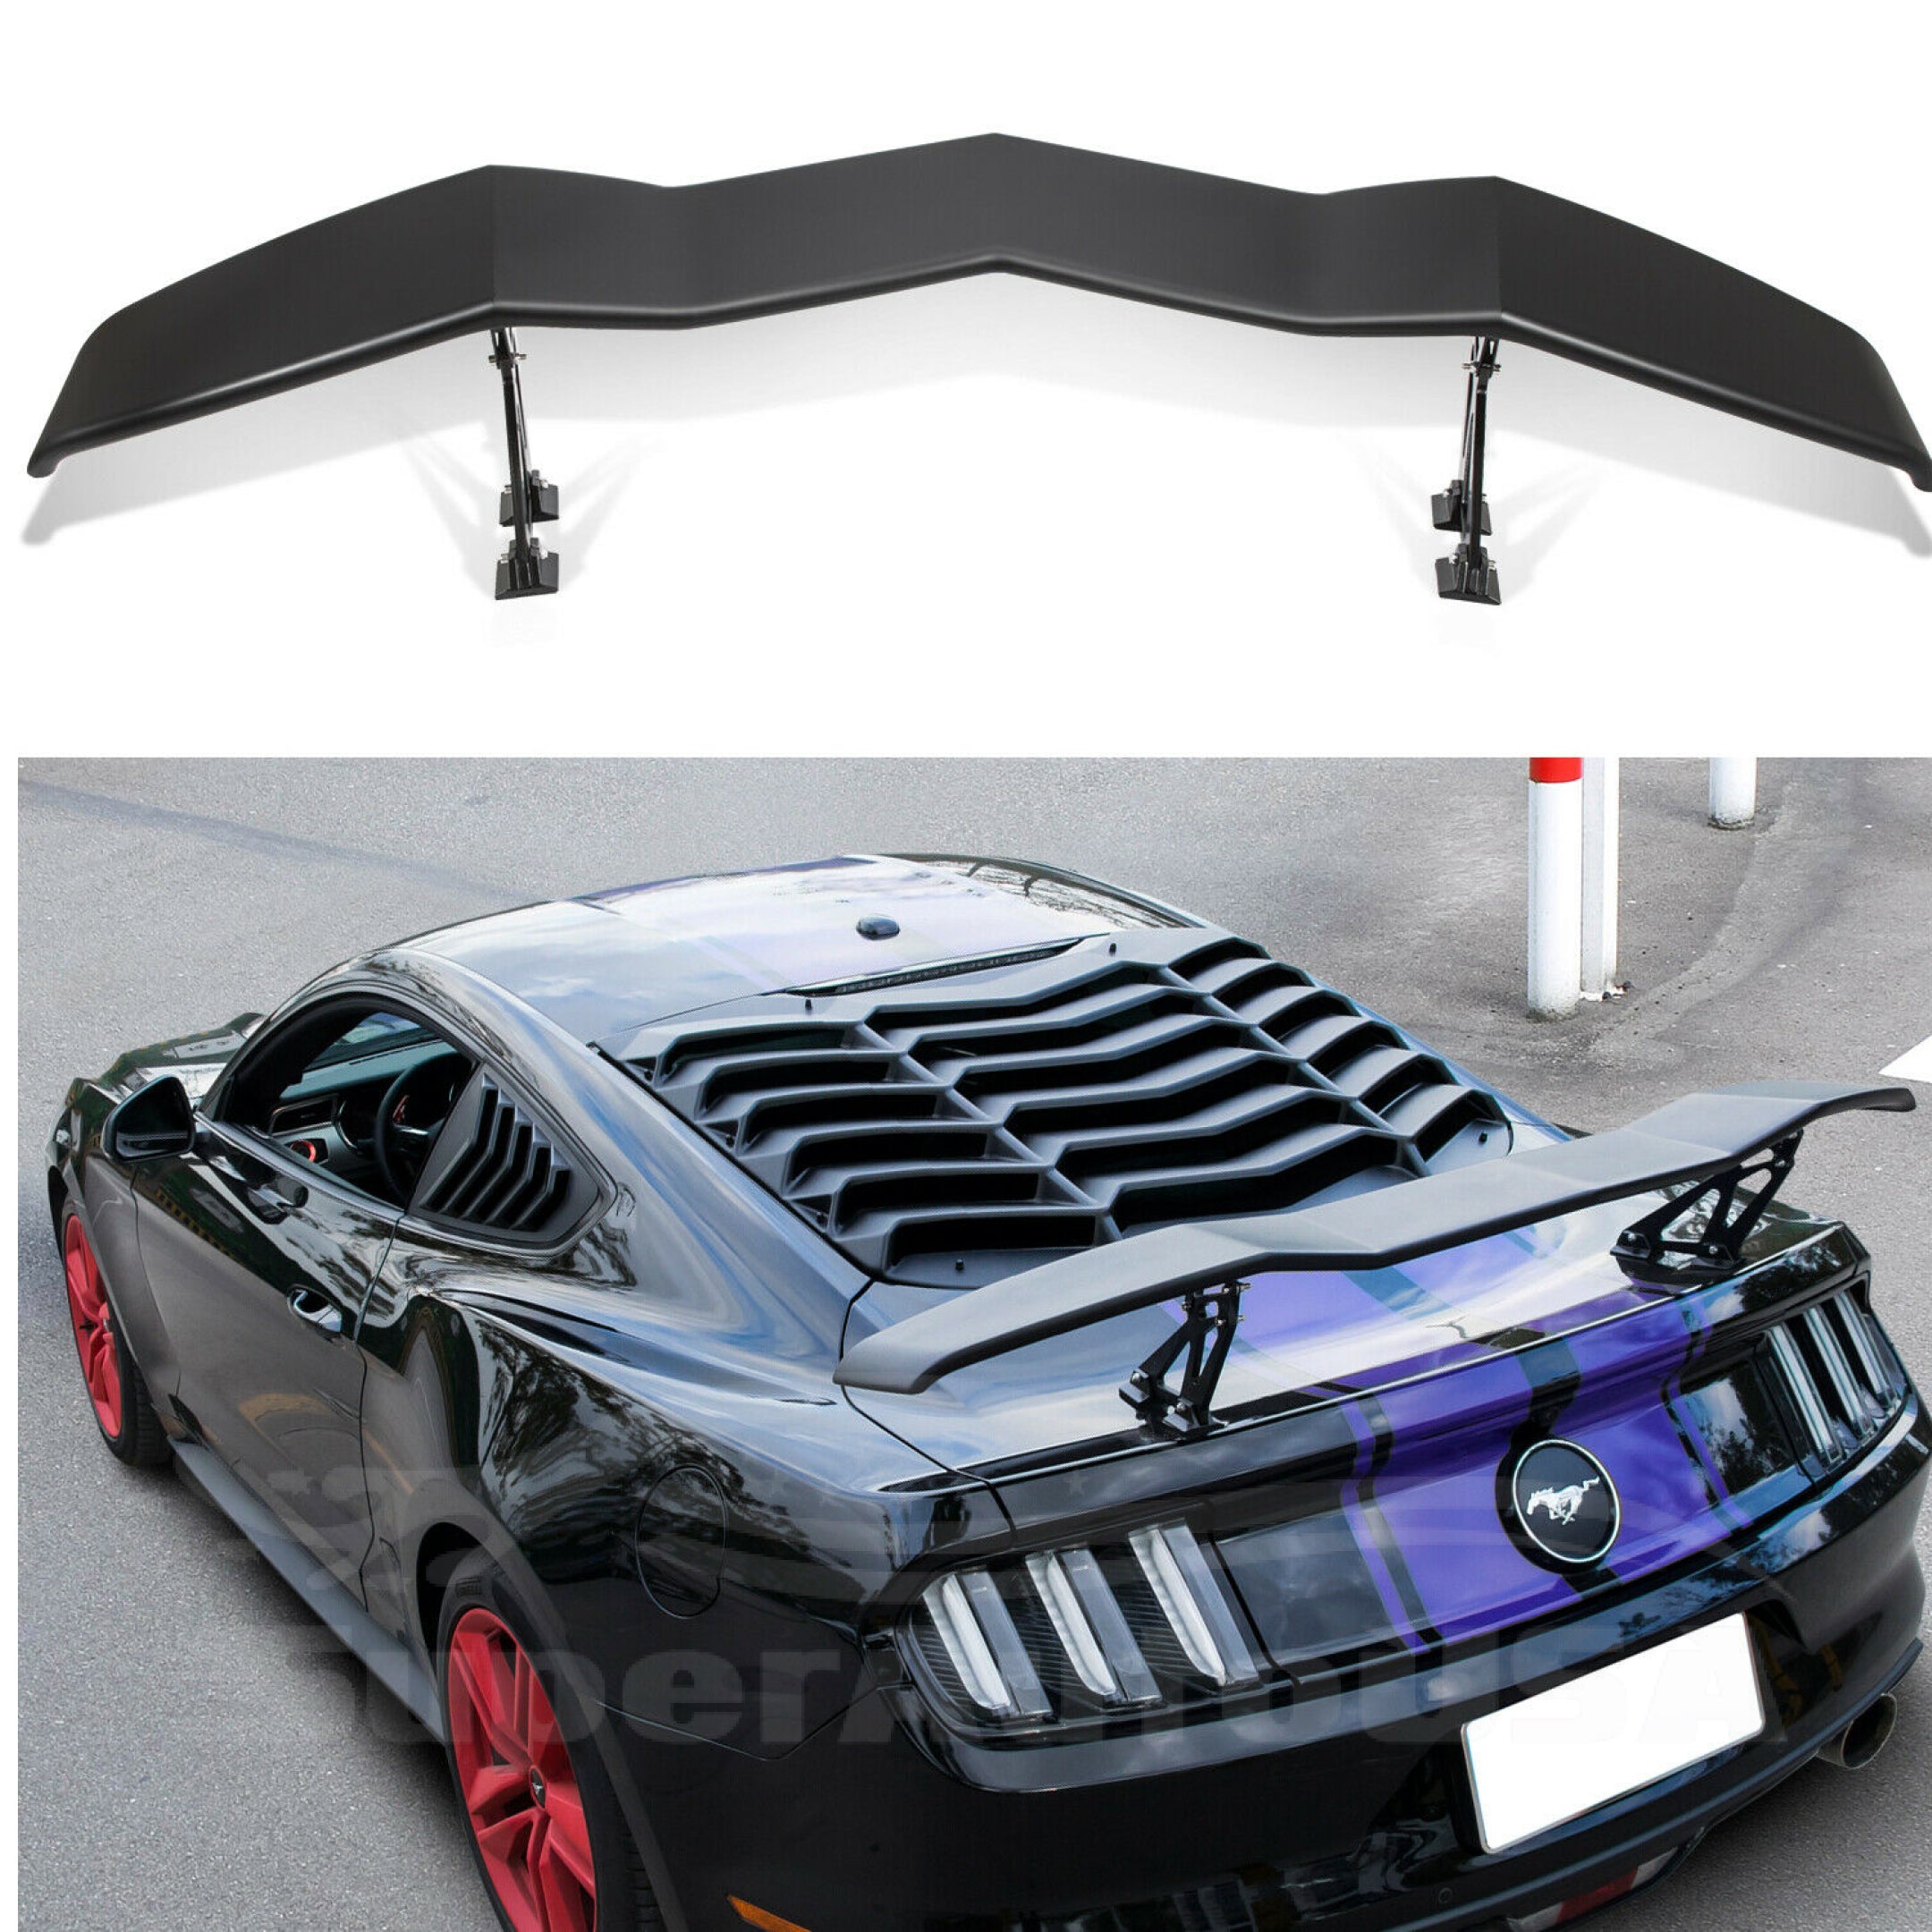 Rear Spoiler & Wings - GT Lambo Style | Fits Ford Mustang  (All Year)